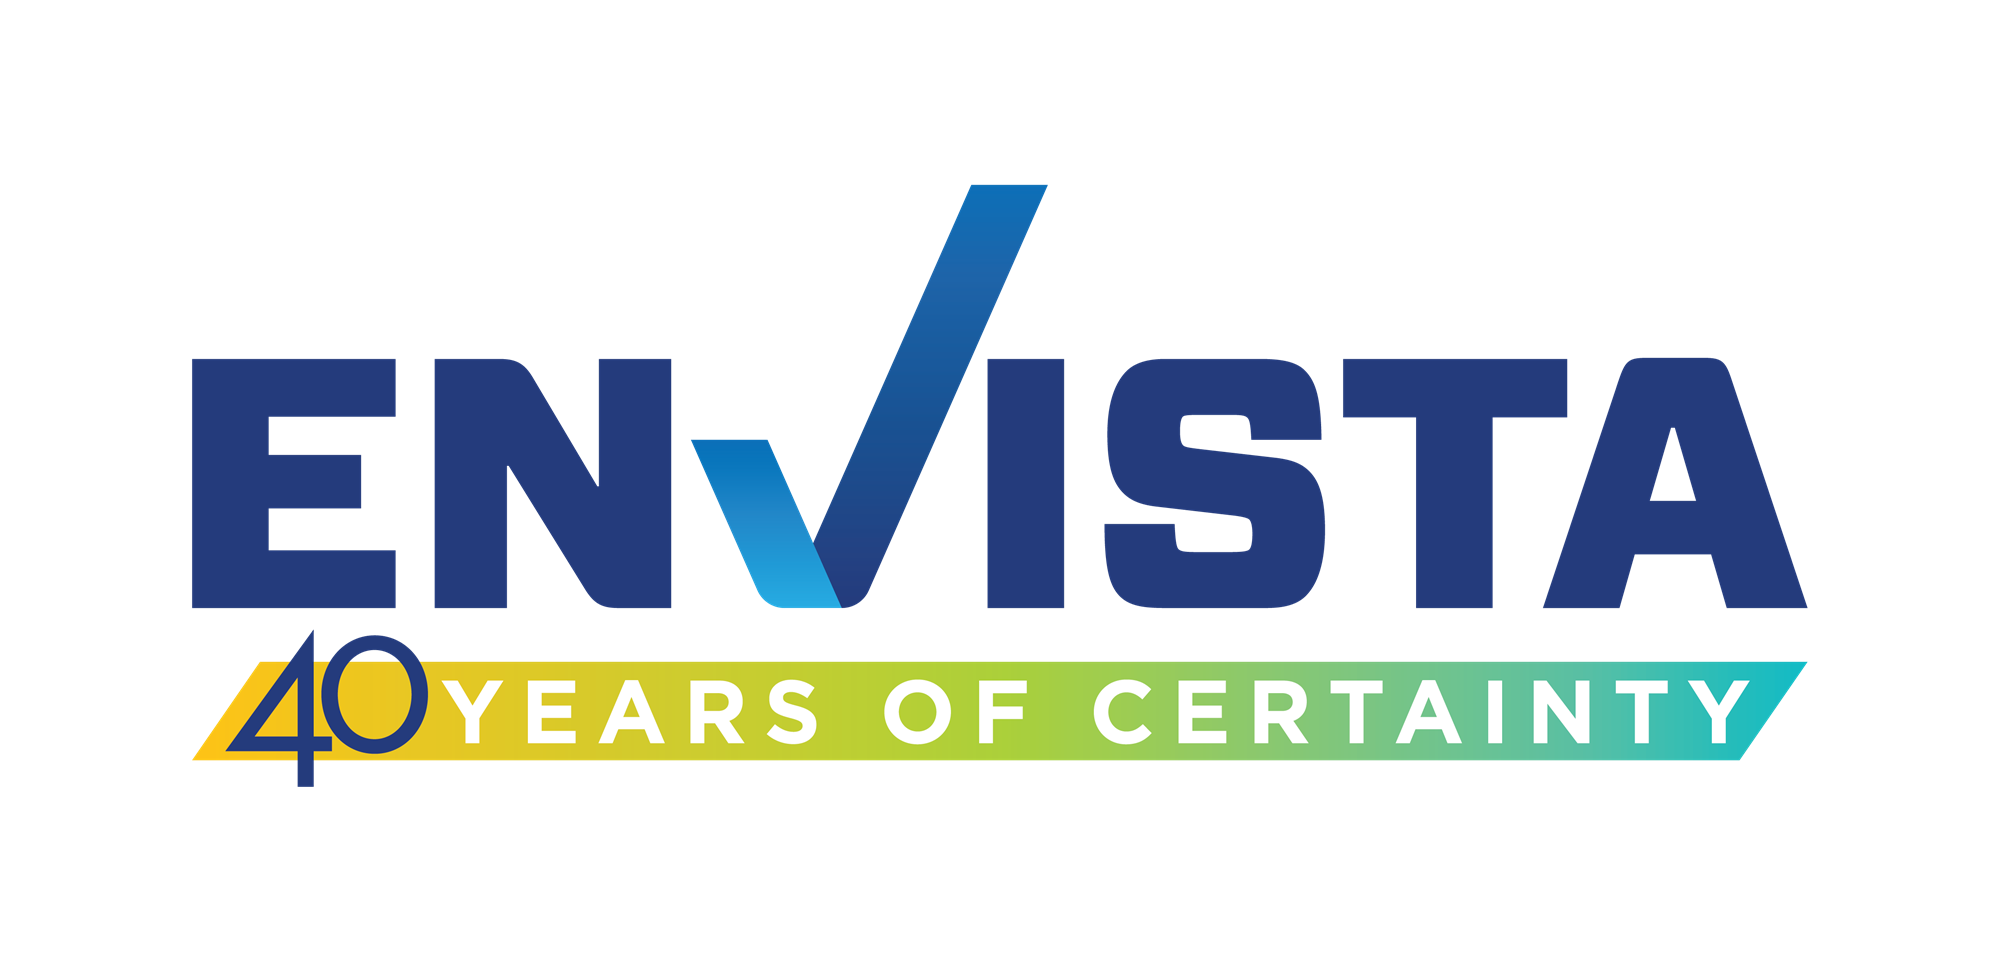 envista 40 year anniversary logo full color high res 03